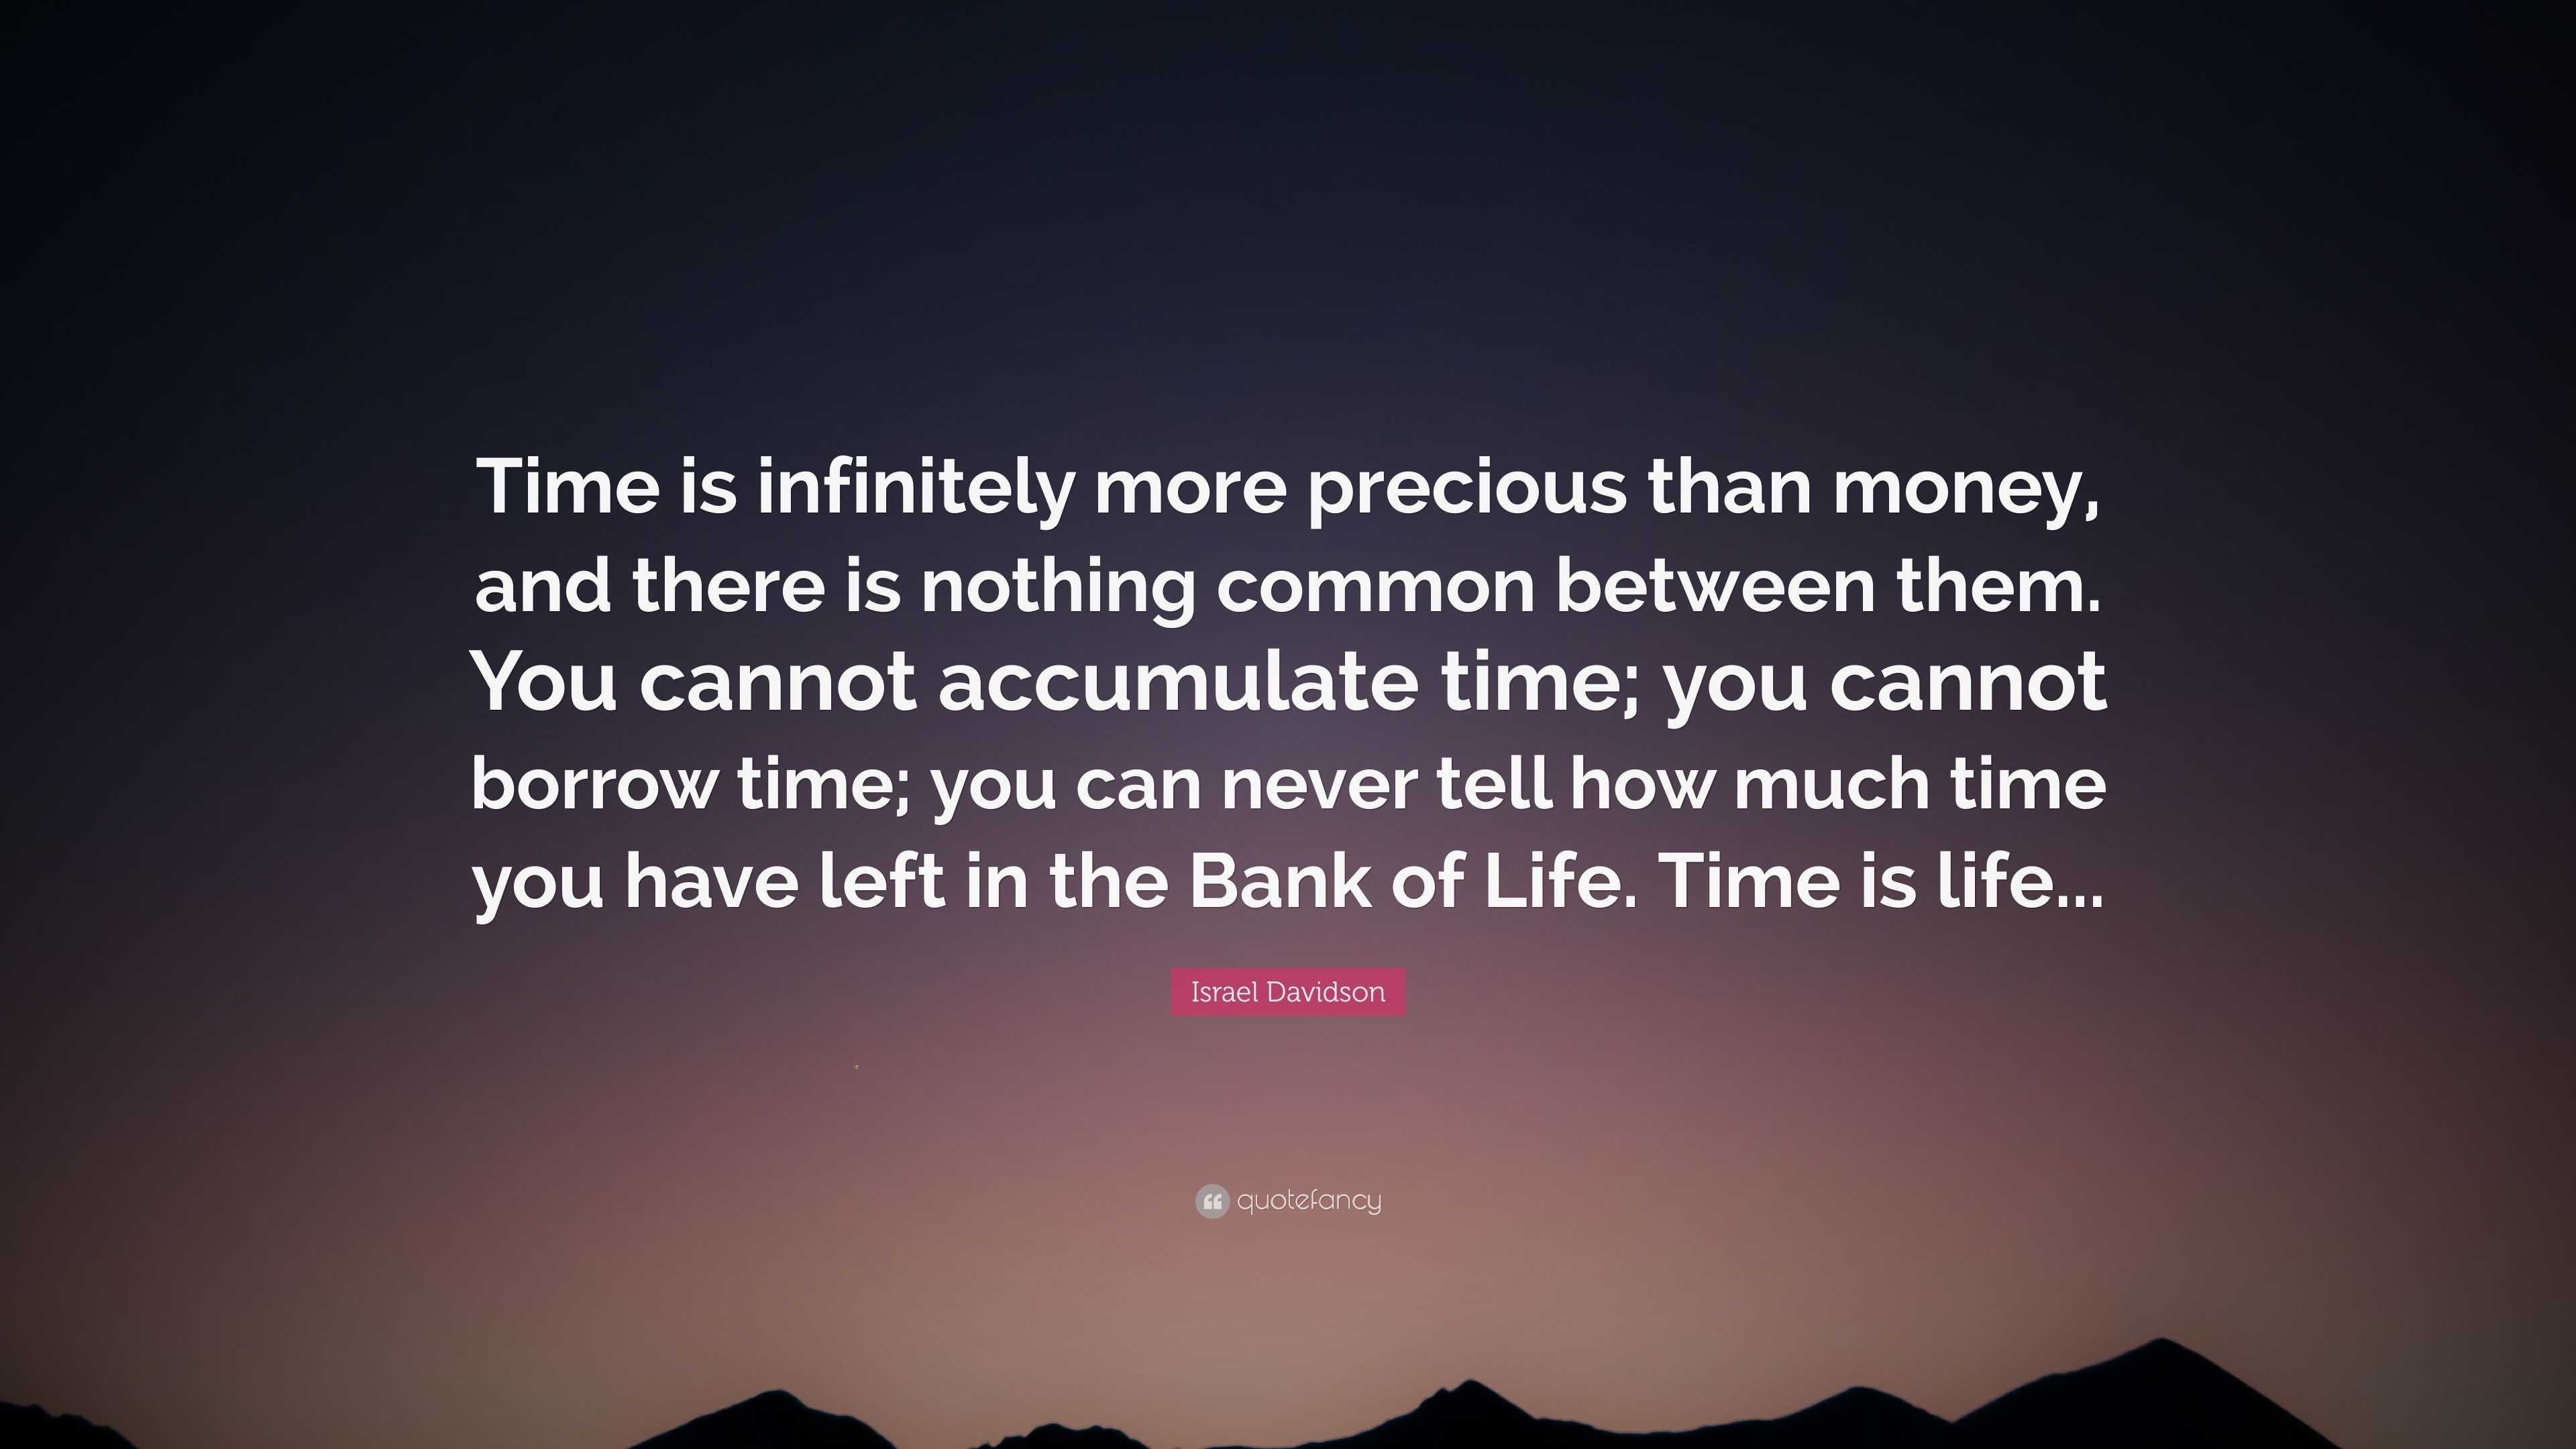 Israel Davidson Quote Time Is Infinitely More Precious Than Money And There Is Nothing Common Between Them You Cannot Accumulate Time You C